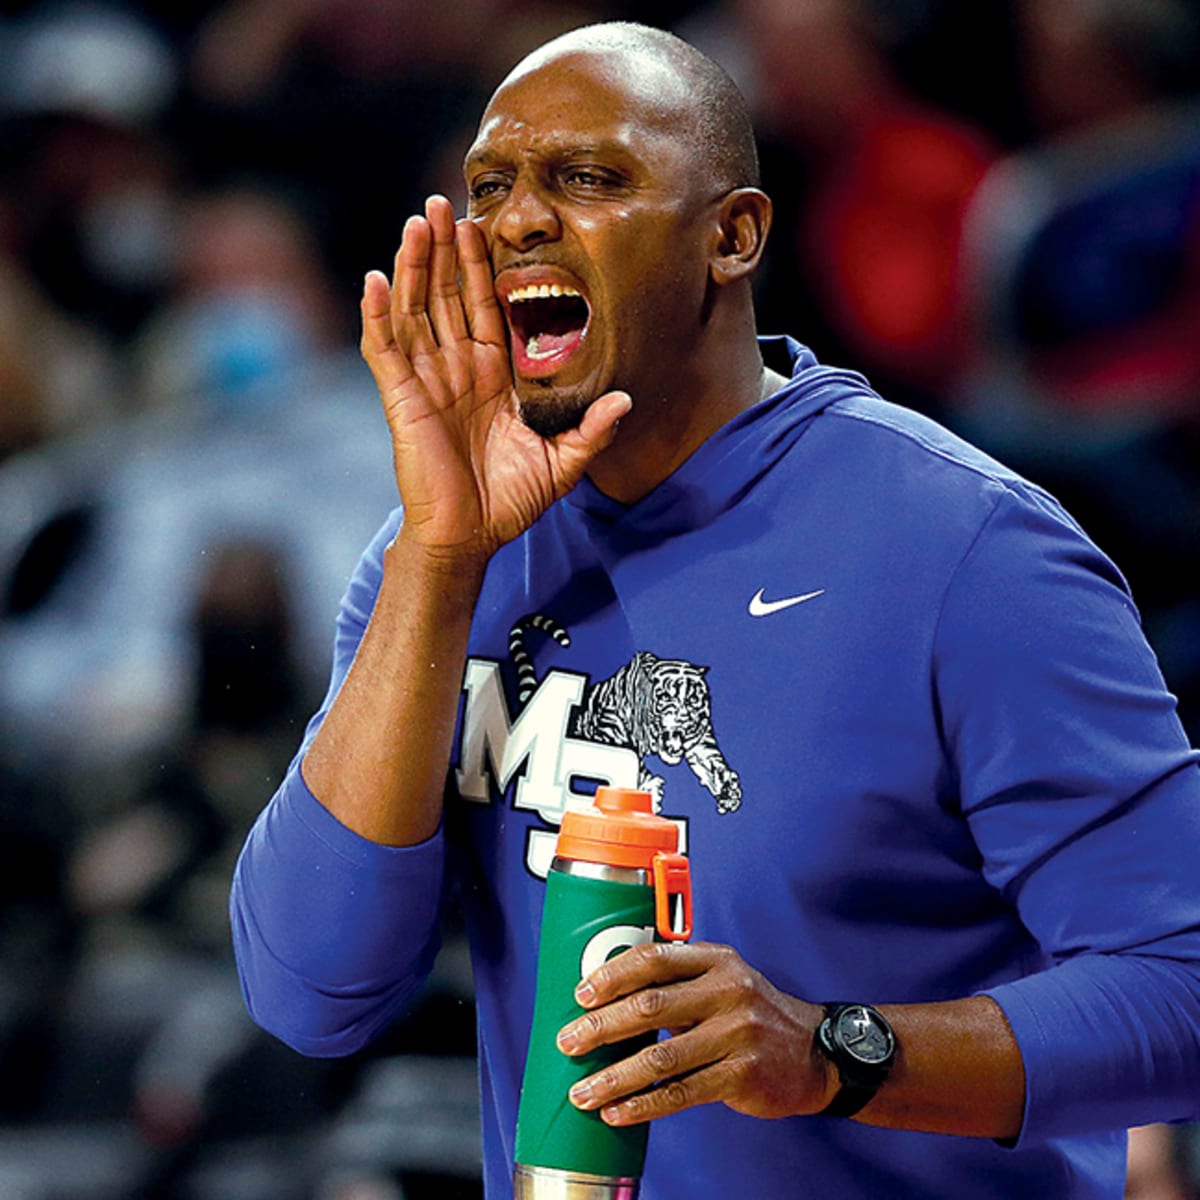 Penny Hardaway on the night HE WAS SHOT, playing basketball with a